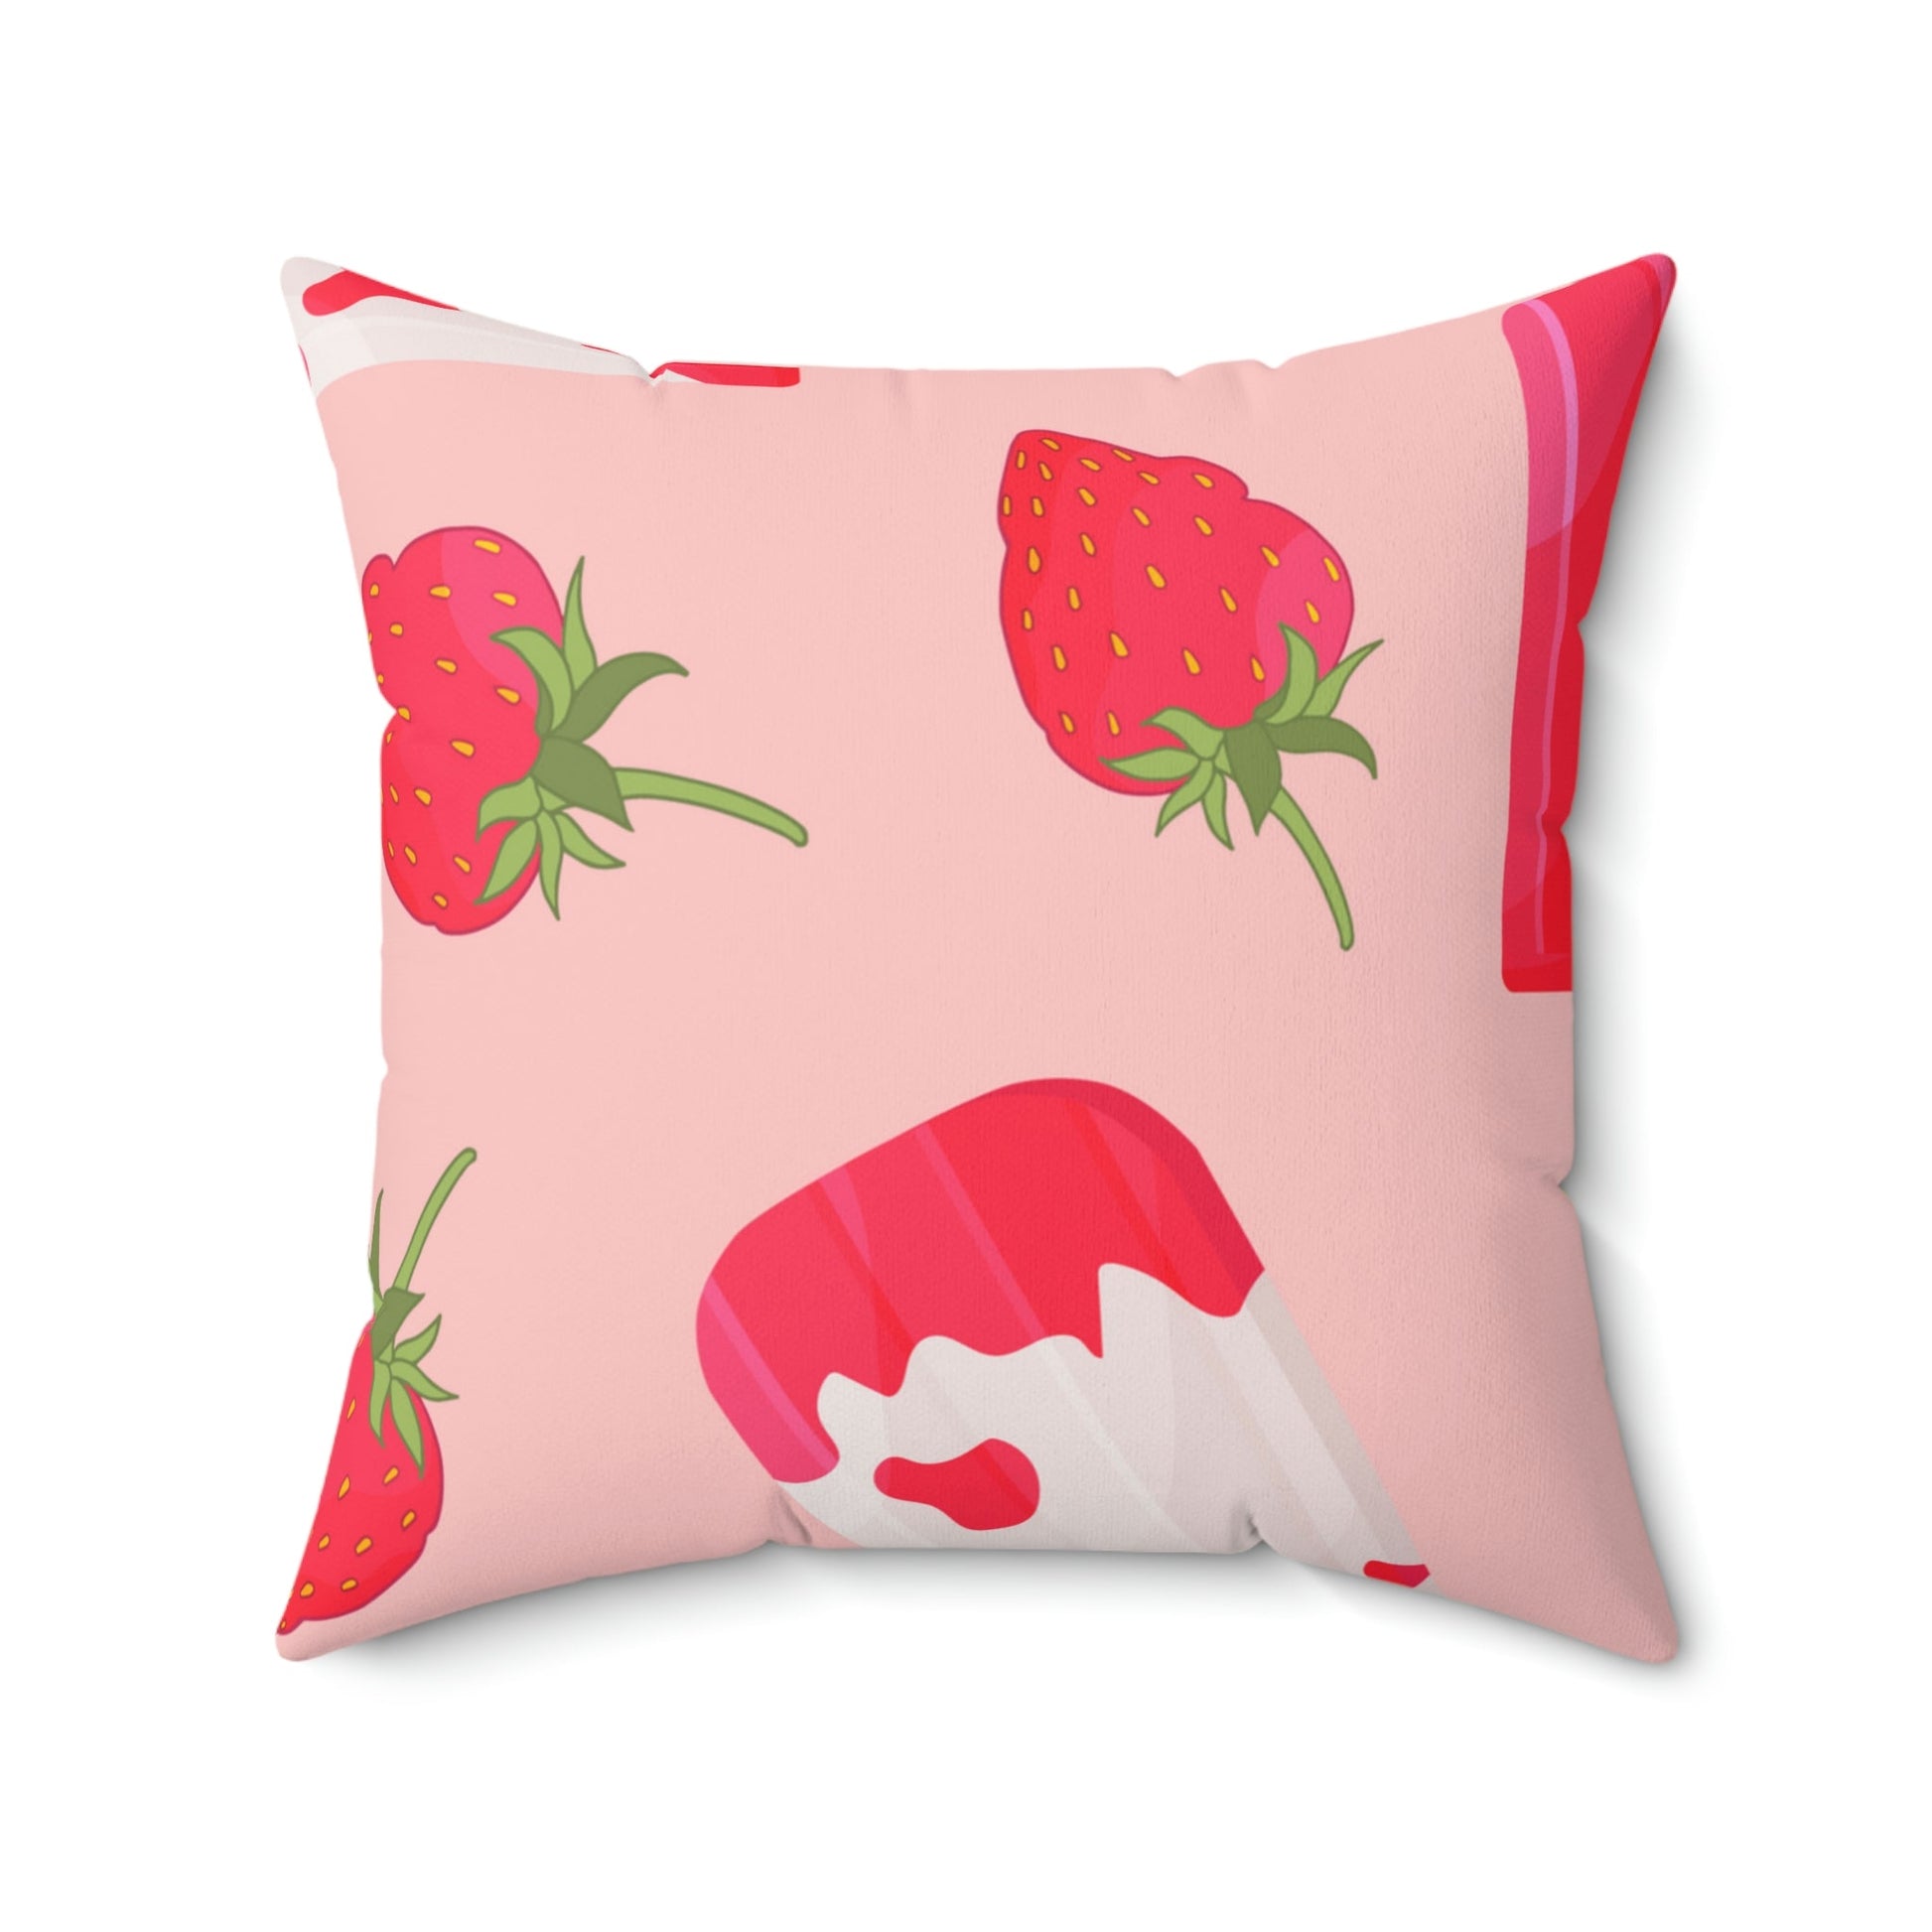 Strawberry Popsicle Square Pillow Home Decor Pink Sweetheart